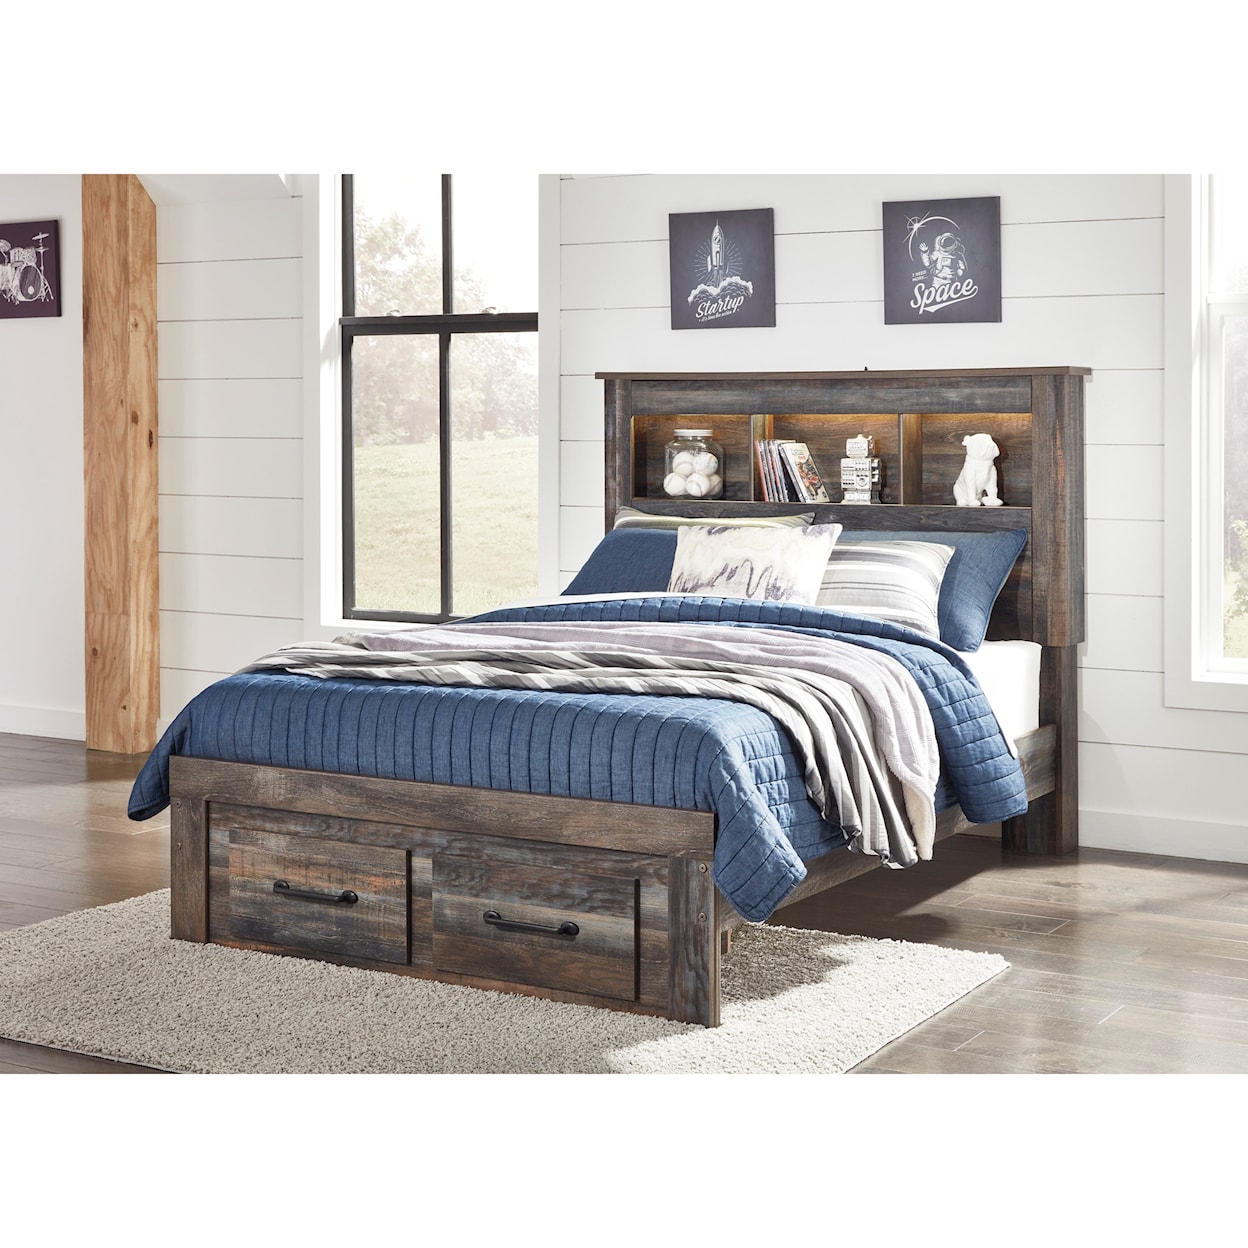 Signature Dalton Full Bookcase Bed with Footboard Drawers